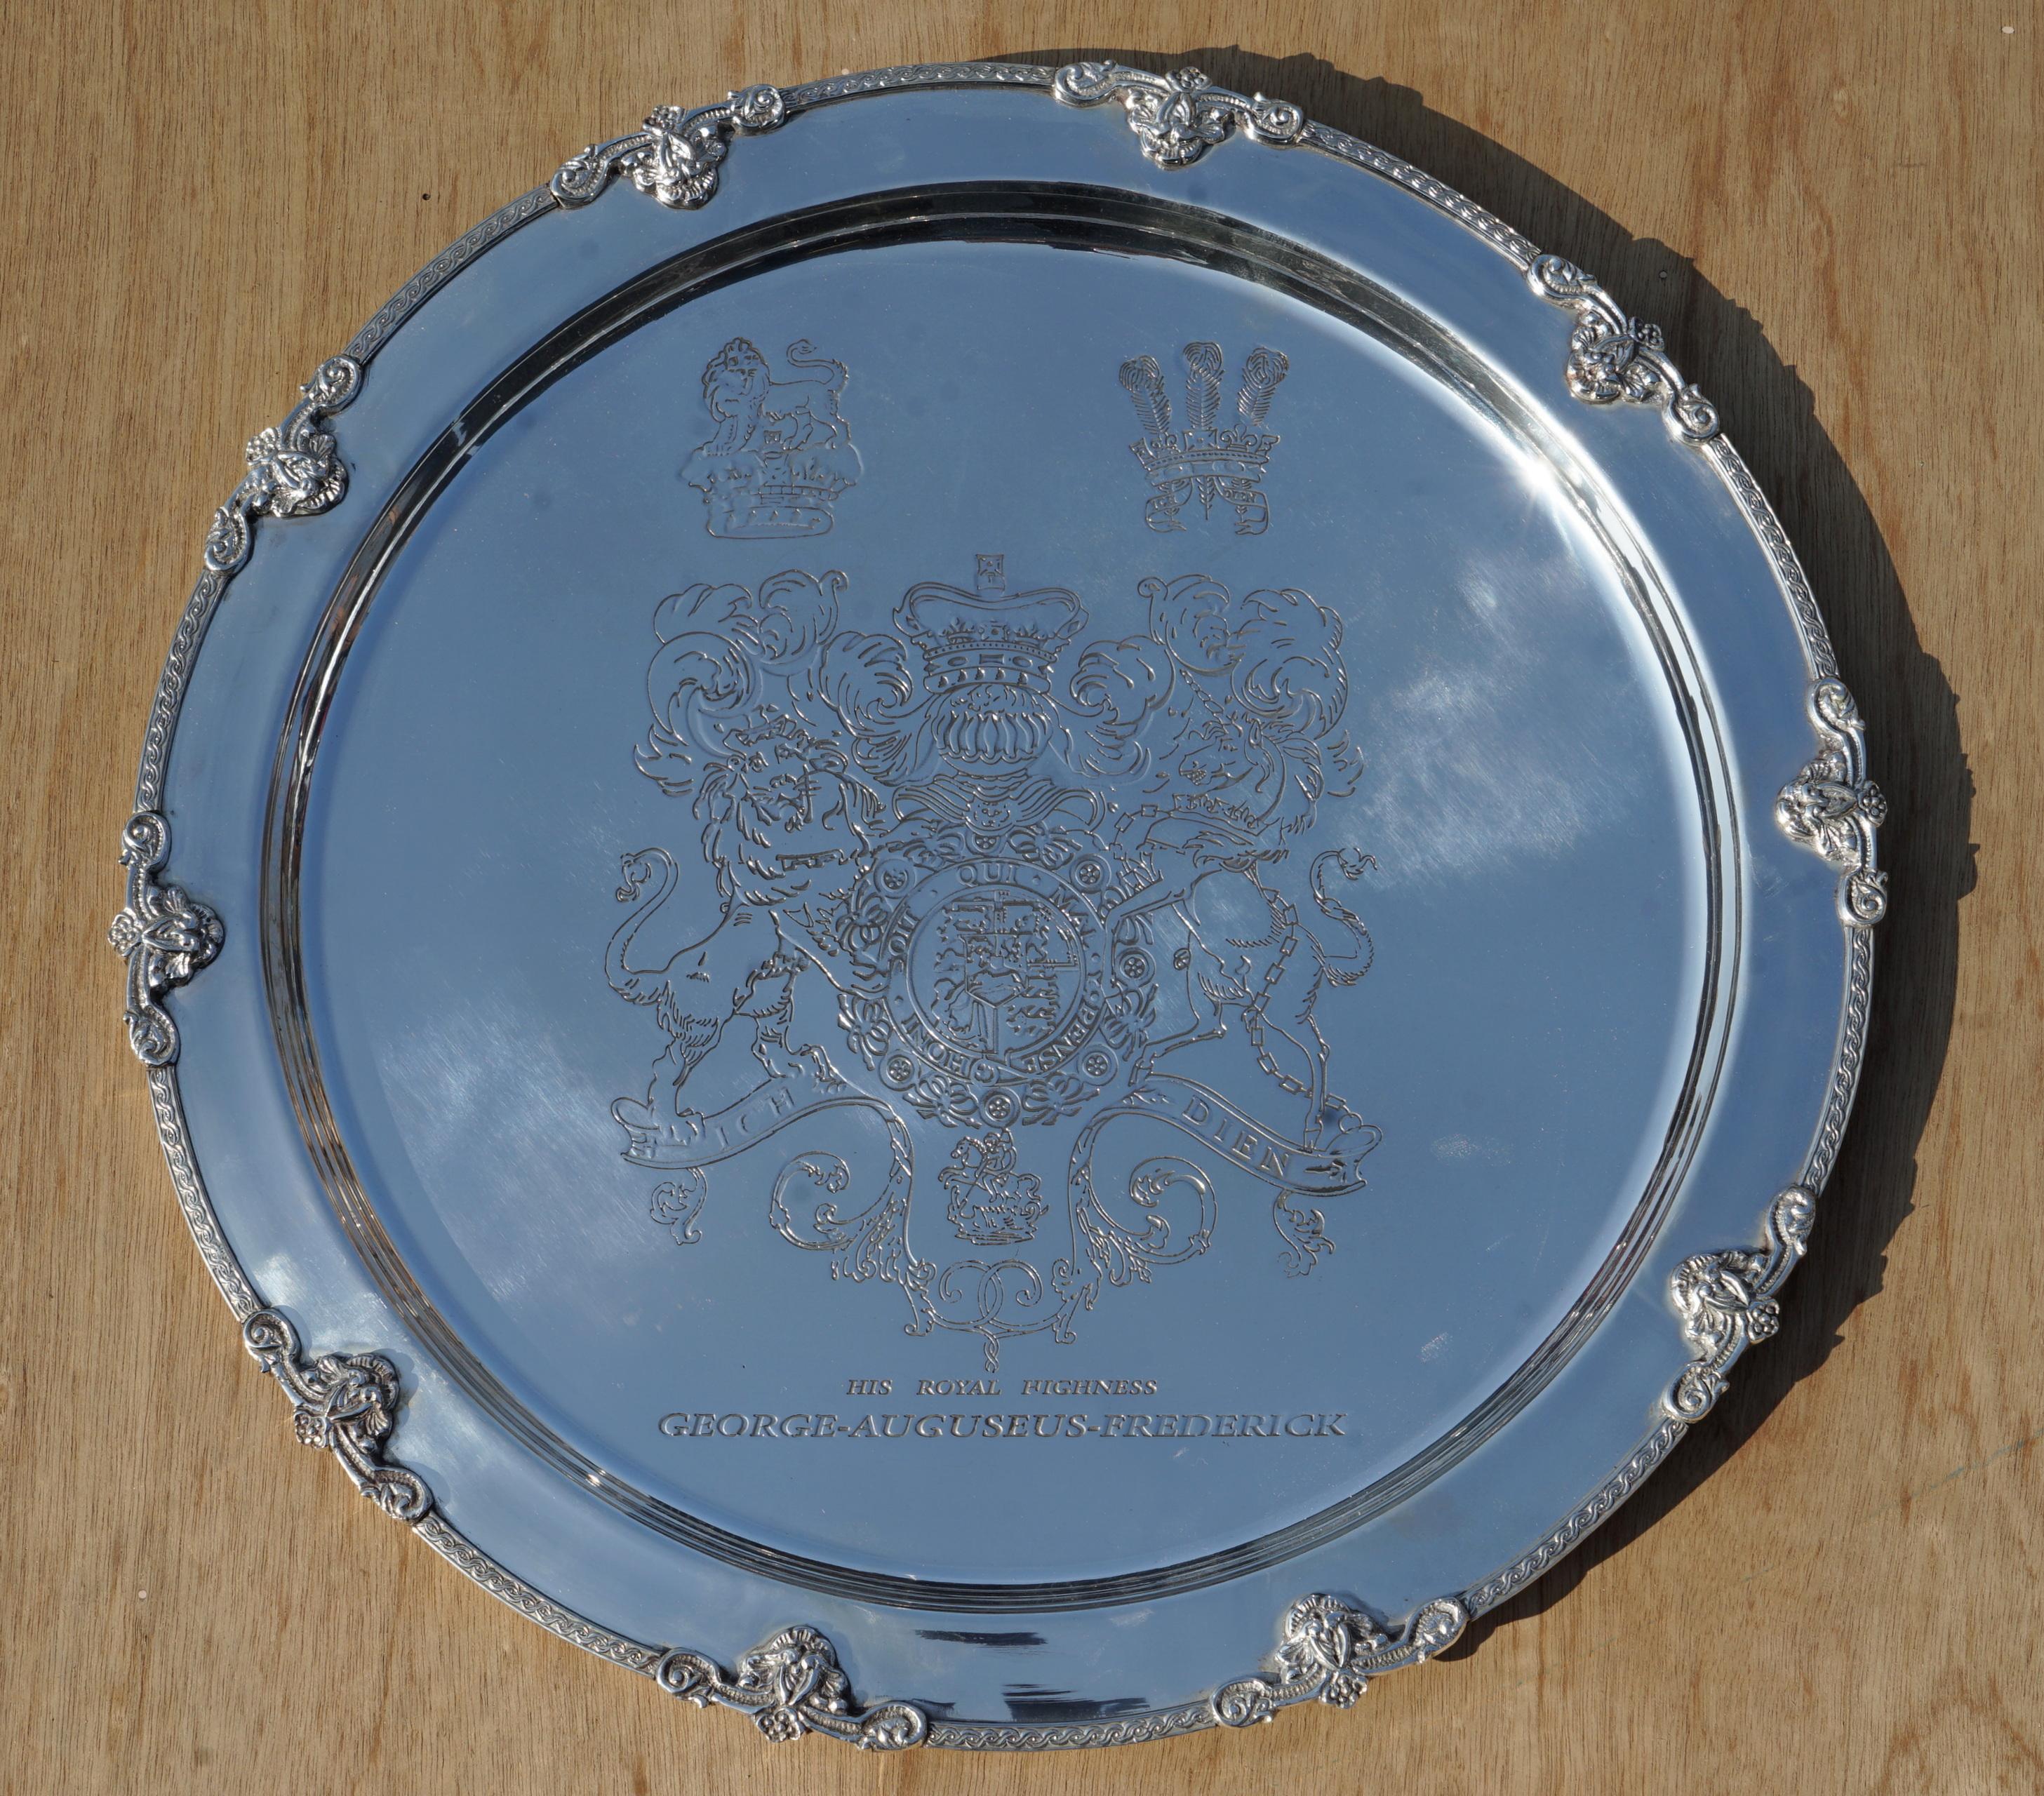 1 of 19 King George Auguseue Frederick Arms Sterling Silver Plated 1919 Trays For Sale 8